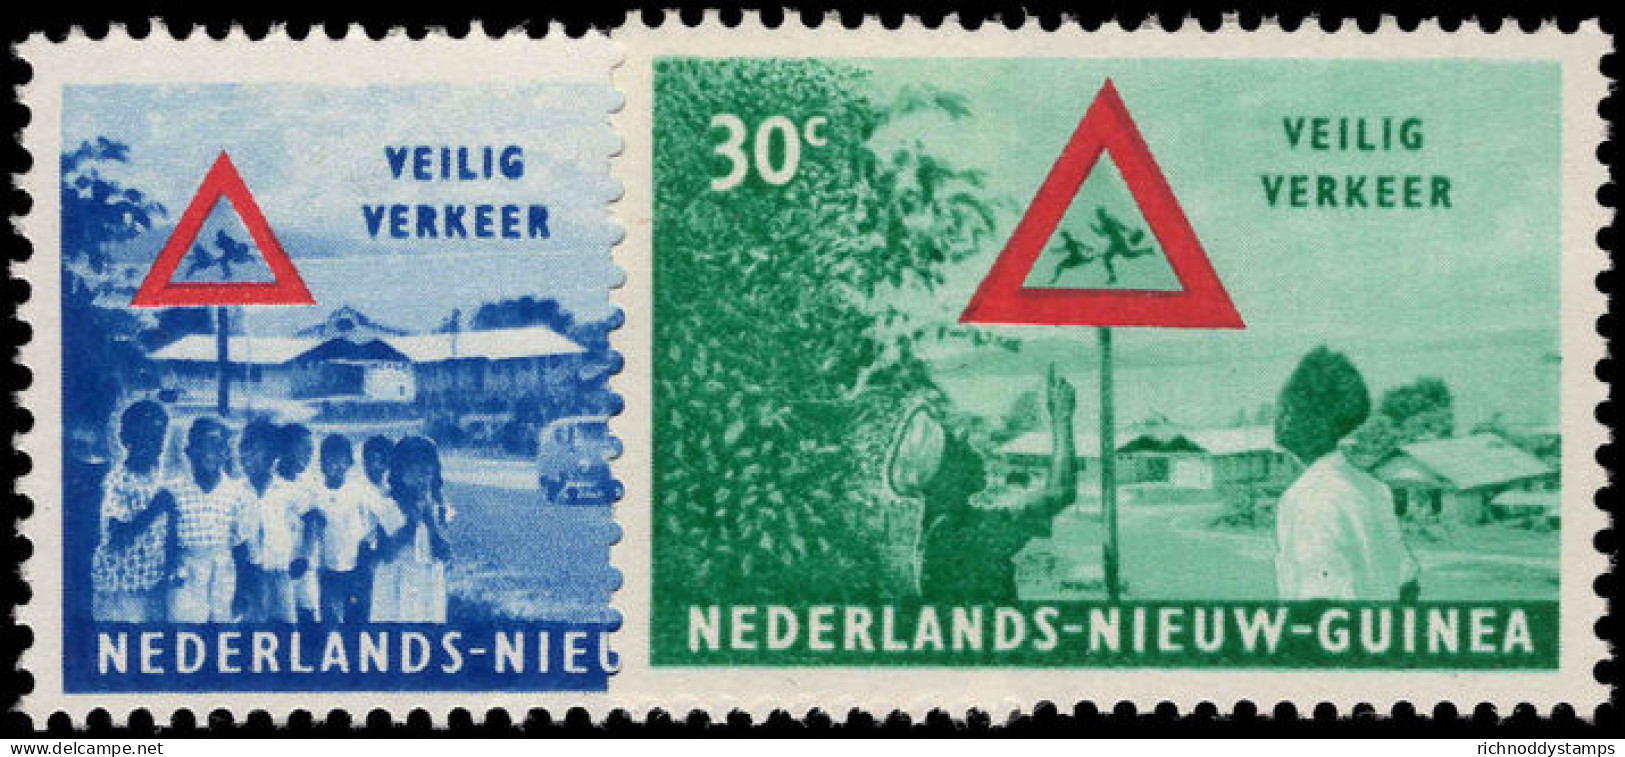 Netherlands New Guinea 1962 Road Safety Unmounted Mint. - Netherlands New Guinea